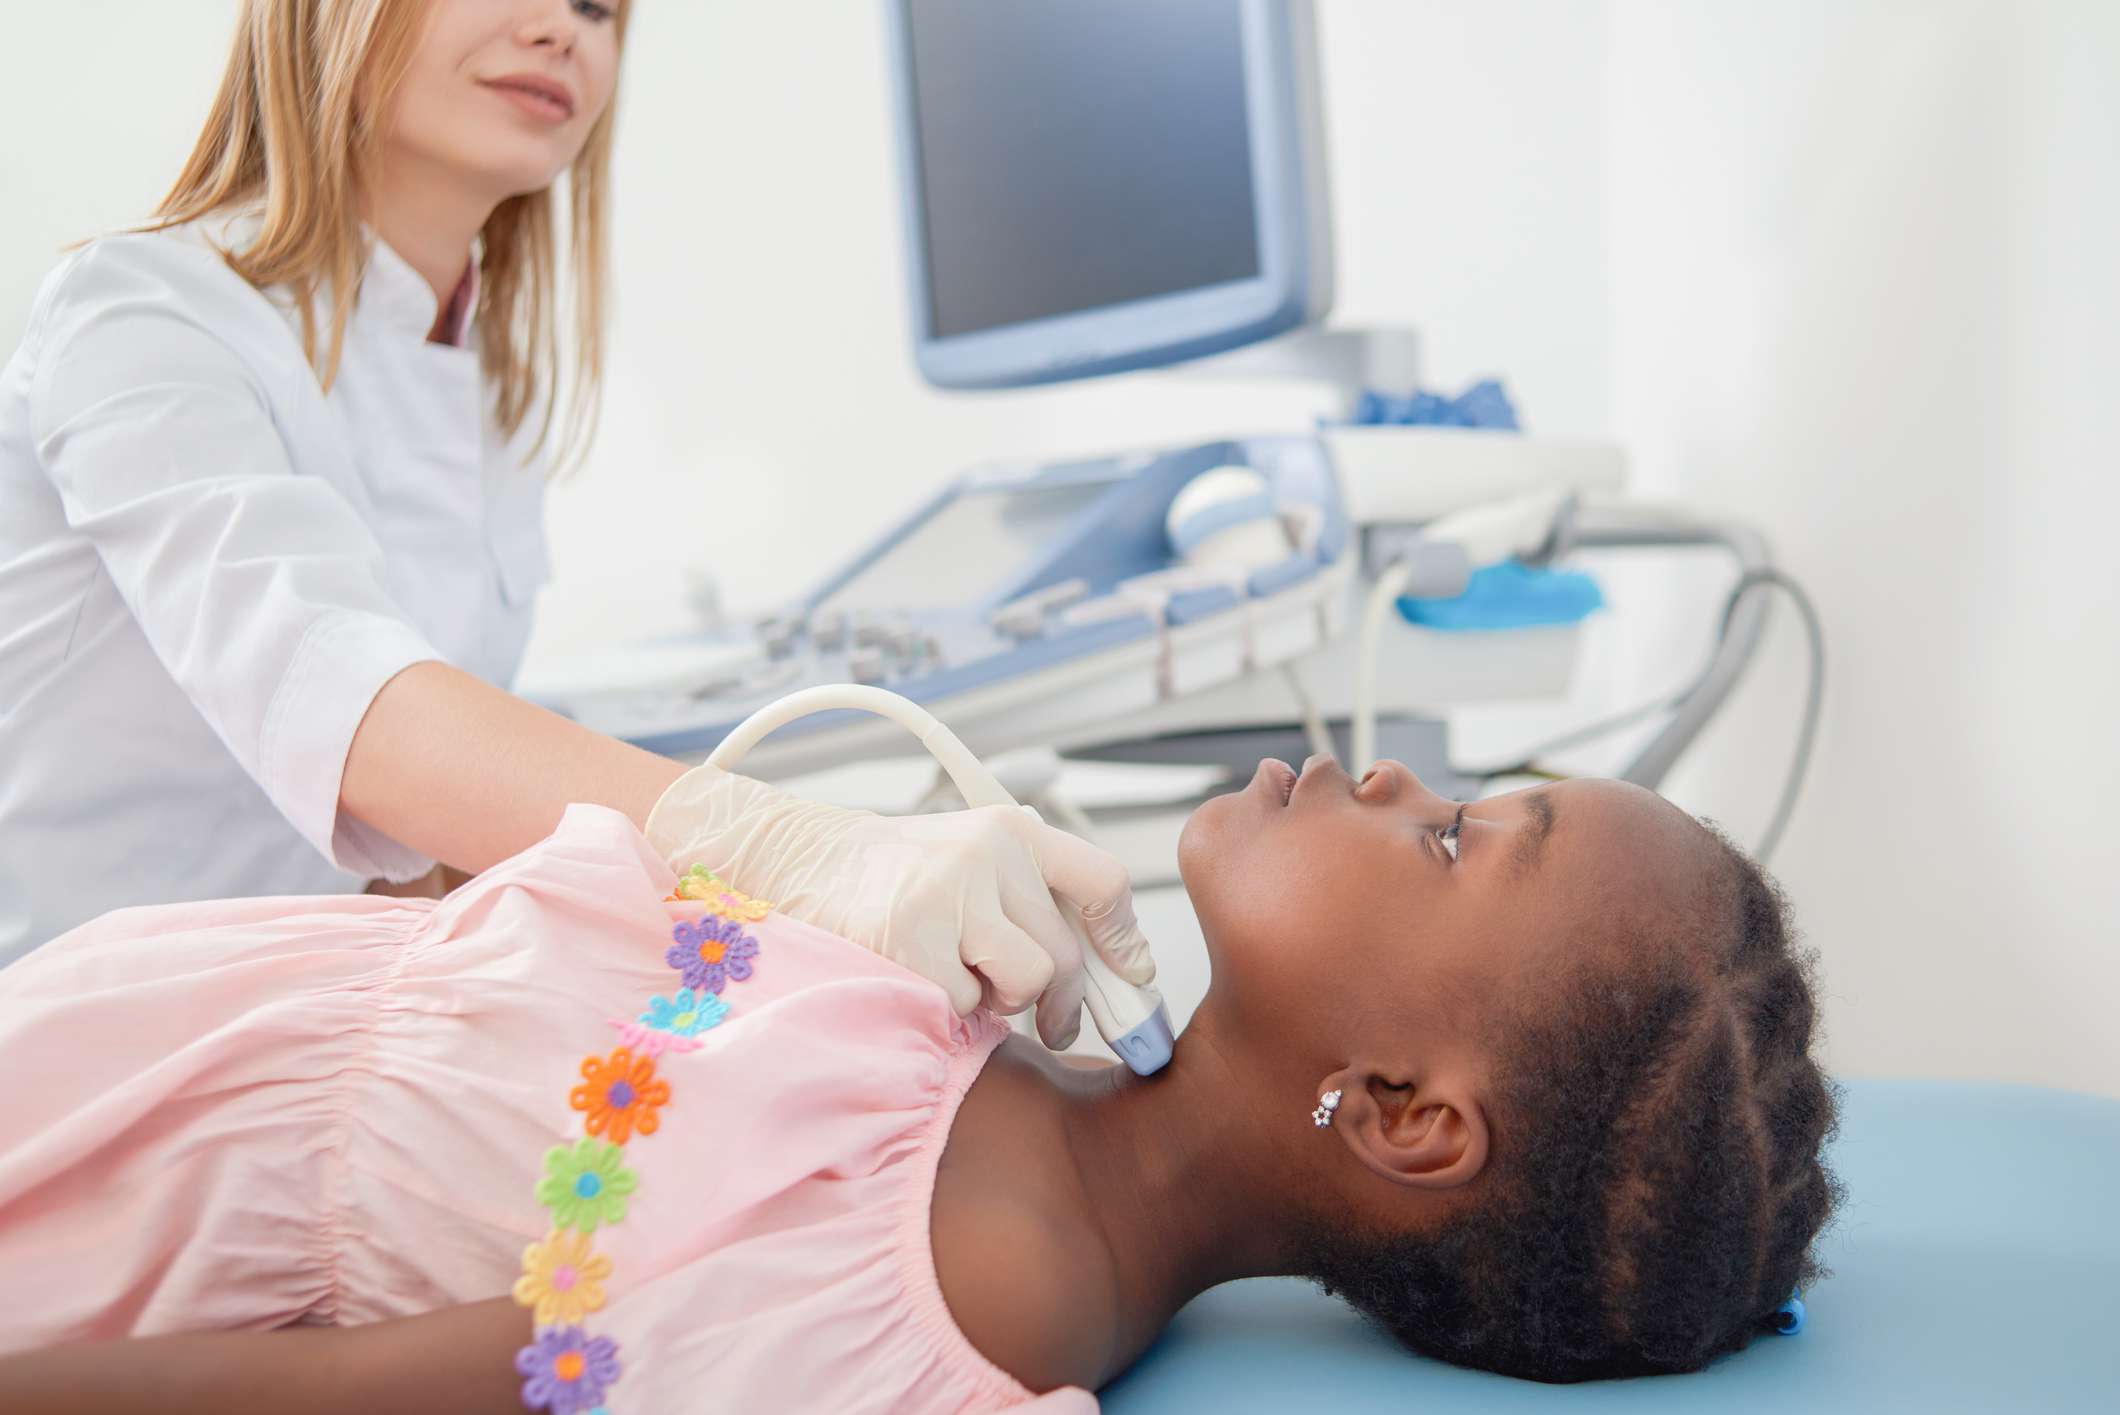 A Caucasian female doctor doing an ultrasound on the neck of a black female child